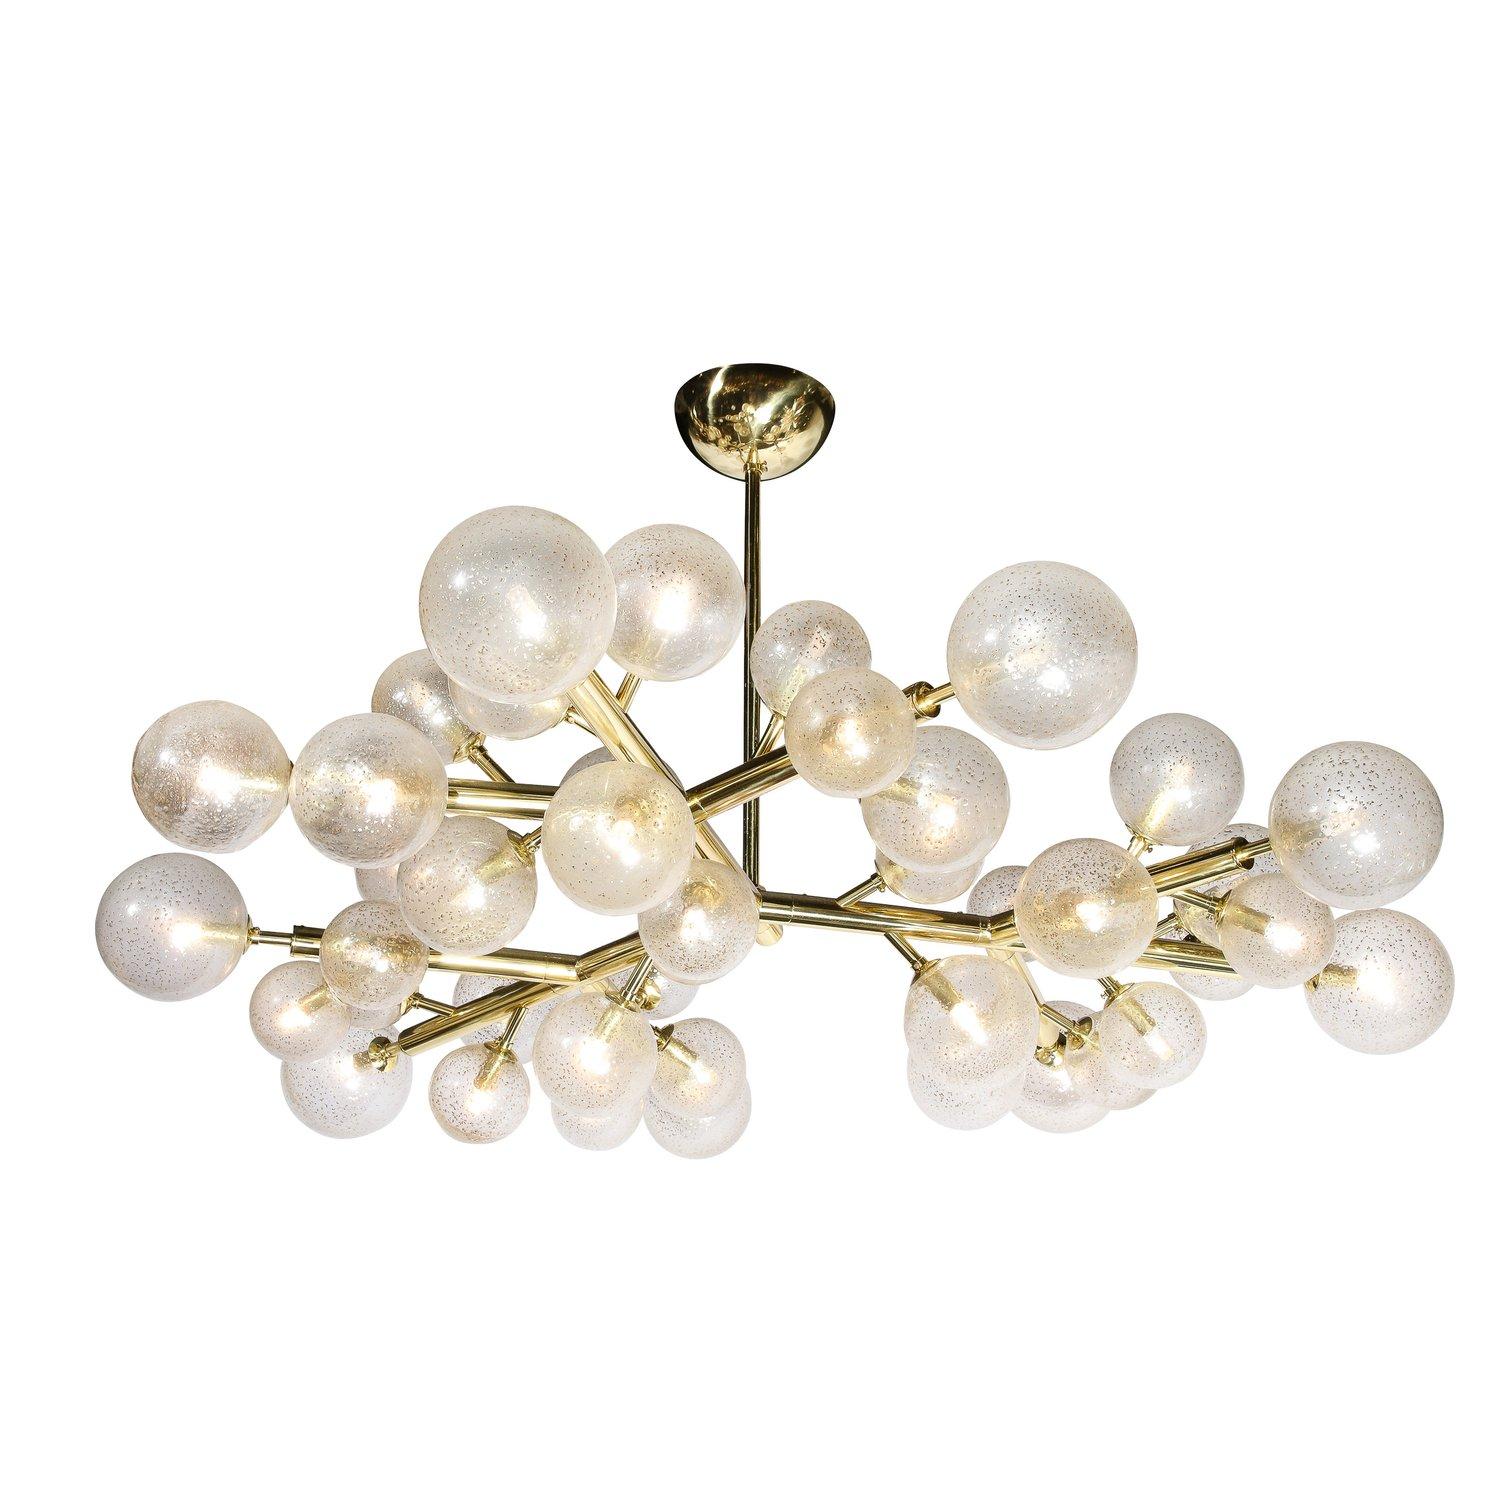 Custom Polished Brass and Murano Glass Molecular "Snowflake" Chandelier For Sale